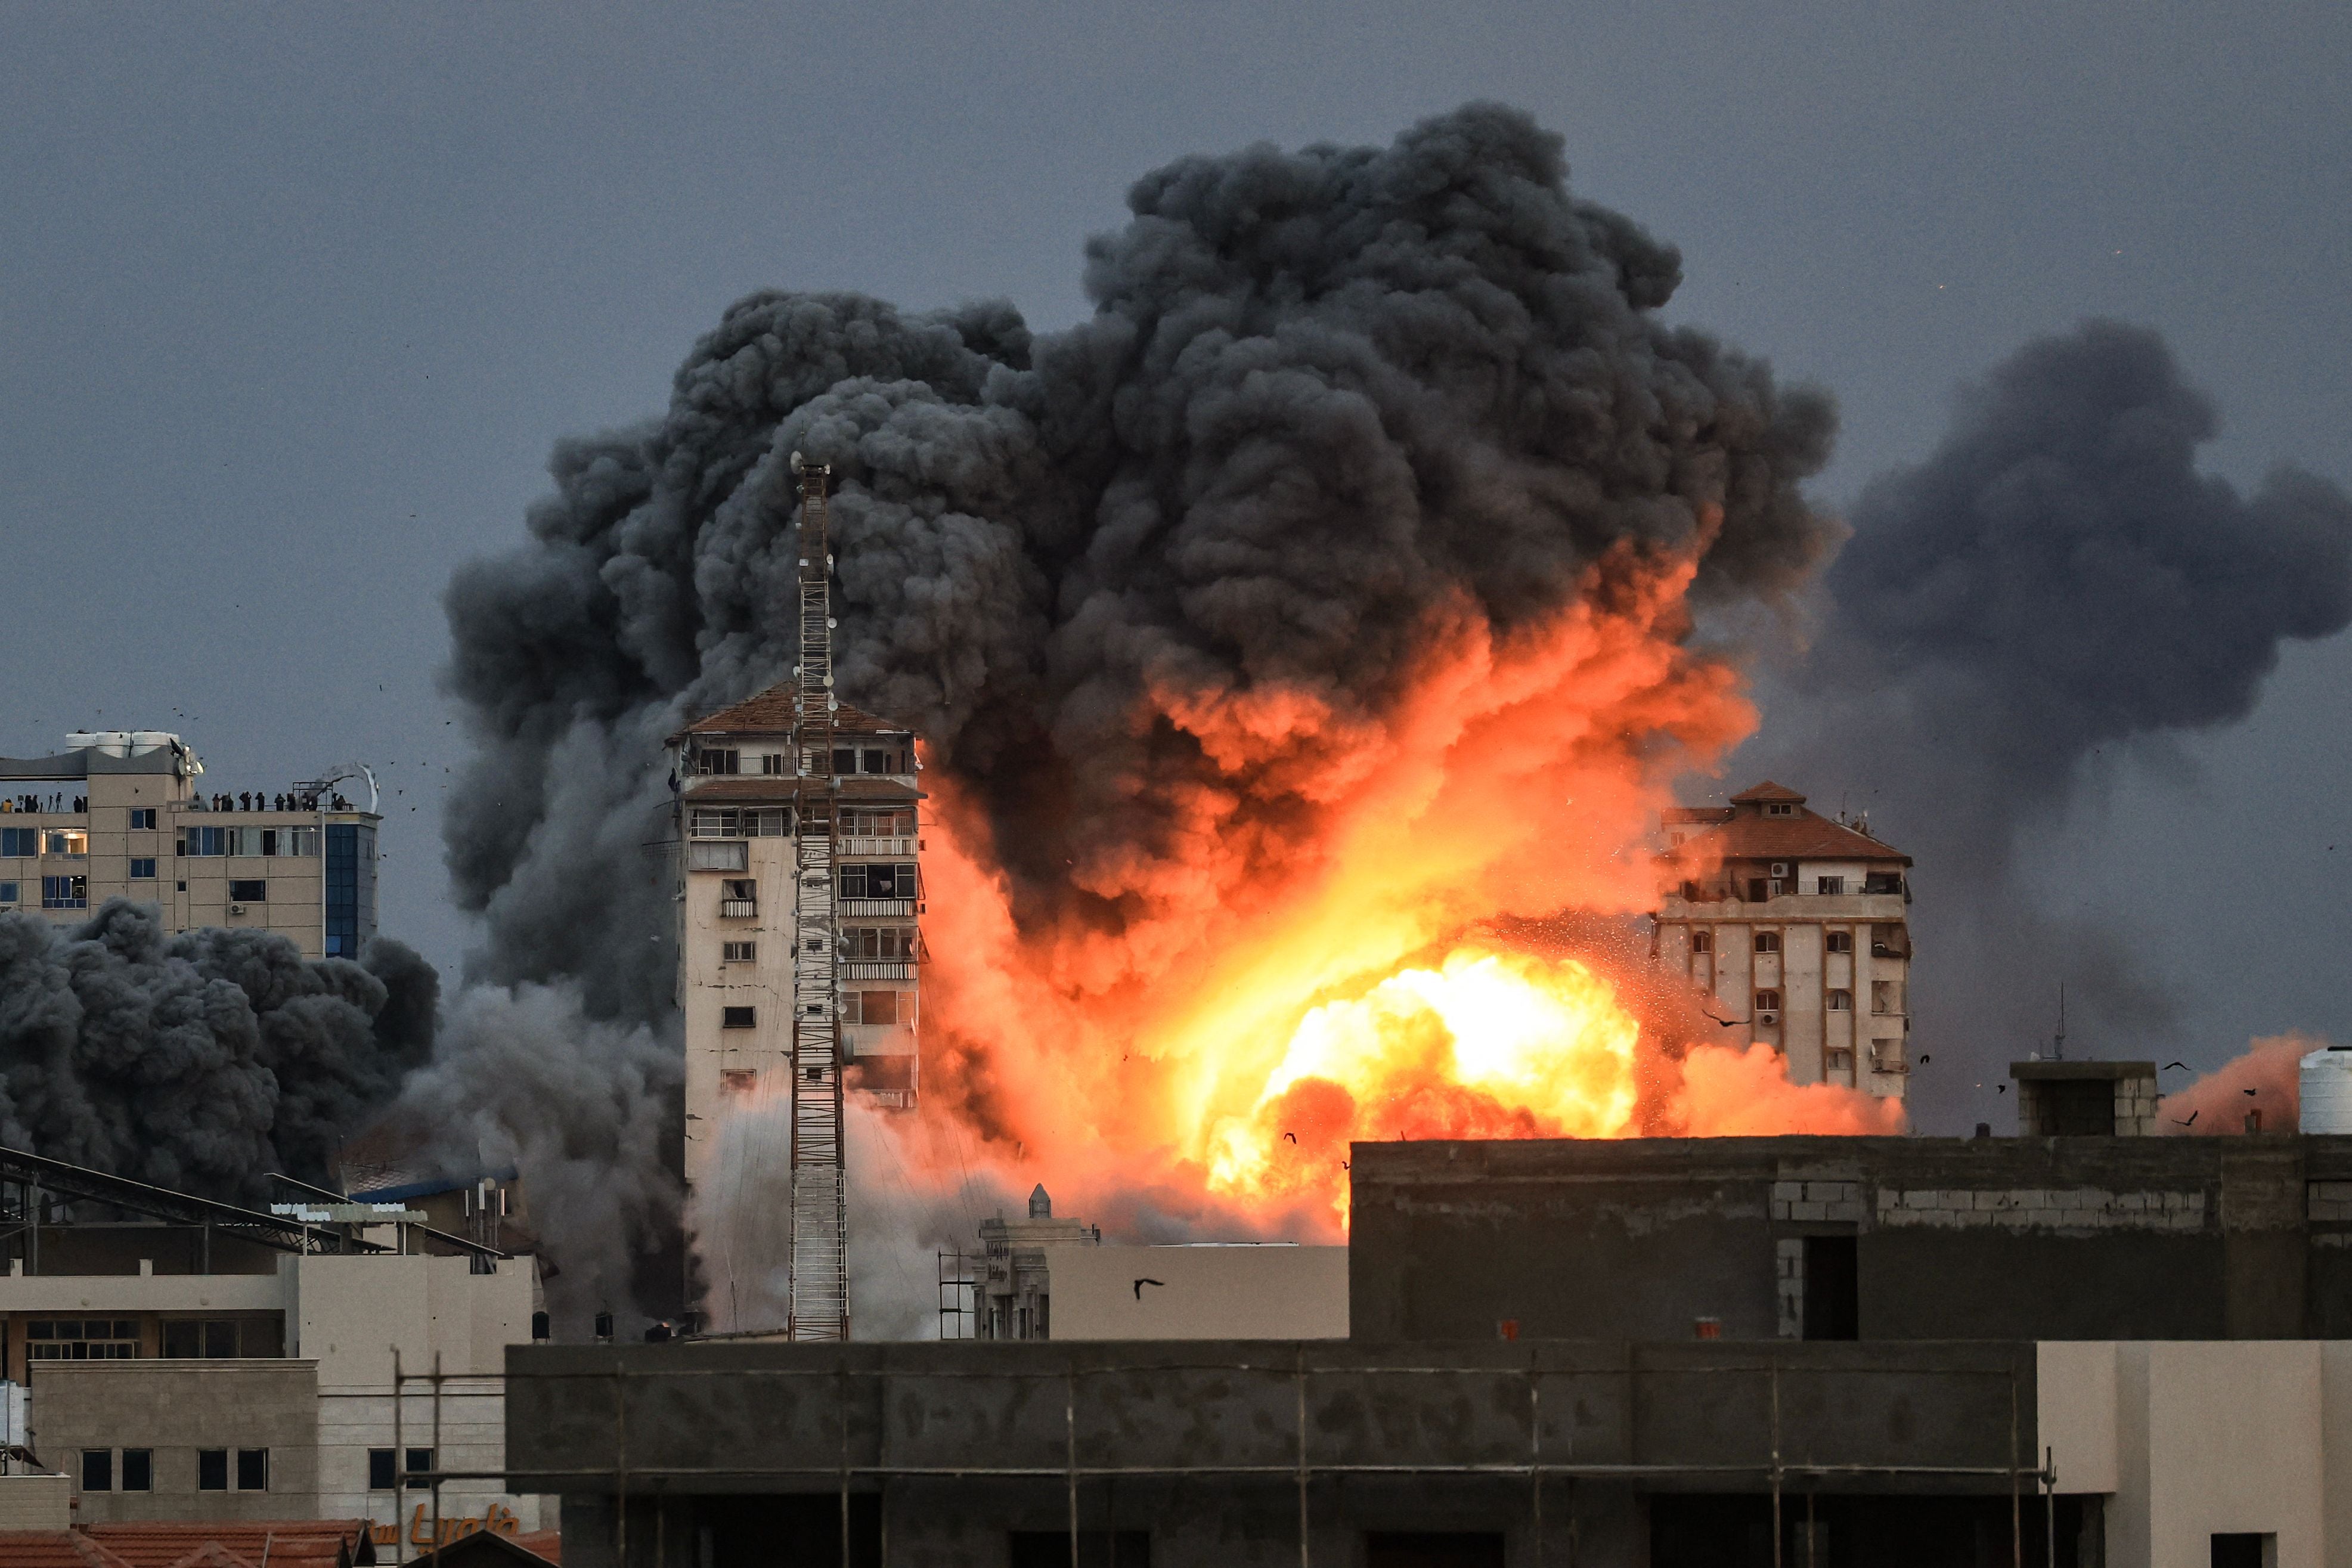 23 foreign nationals including 2 British citizens are said to be trapped in Gaza as Israeli air strikes continue